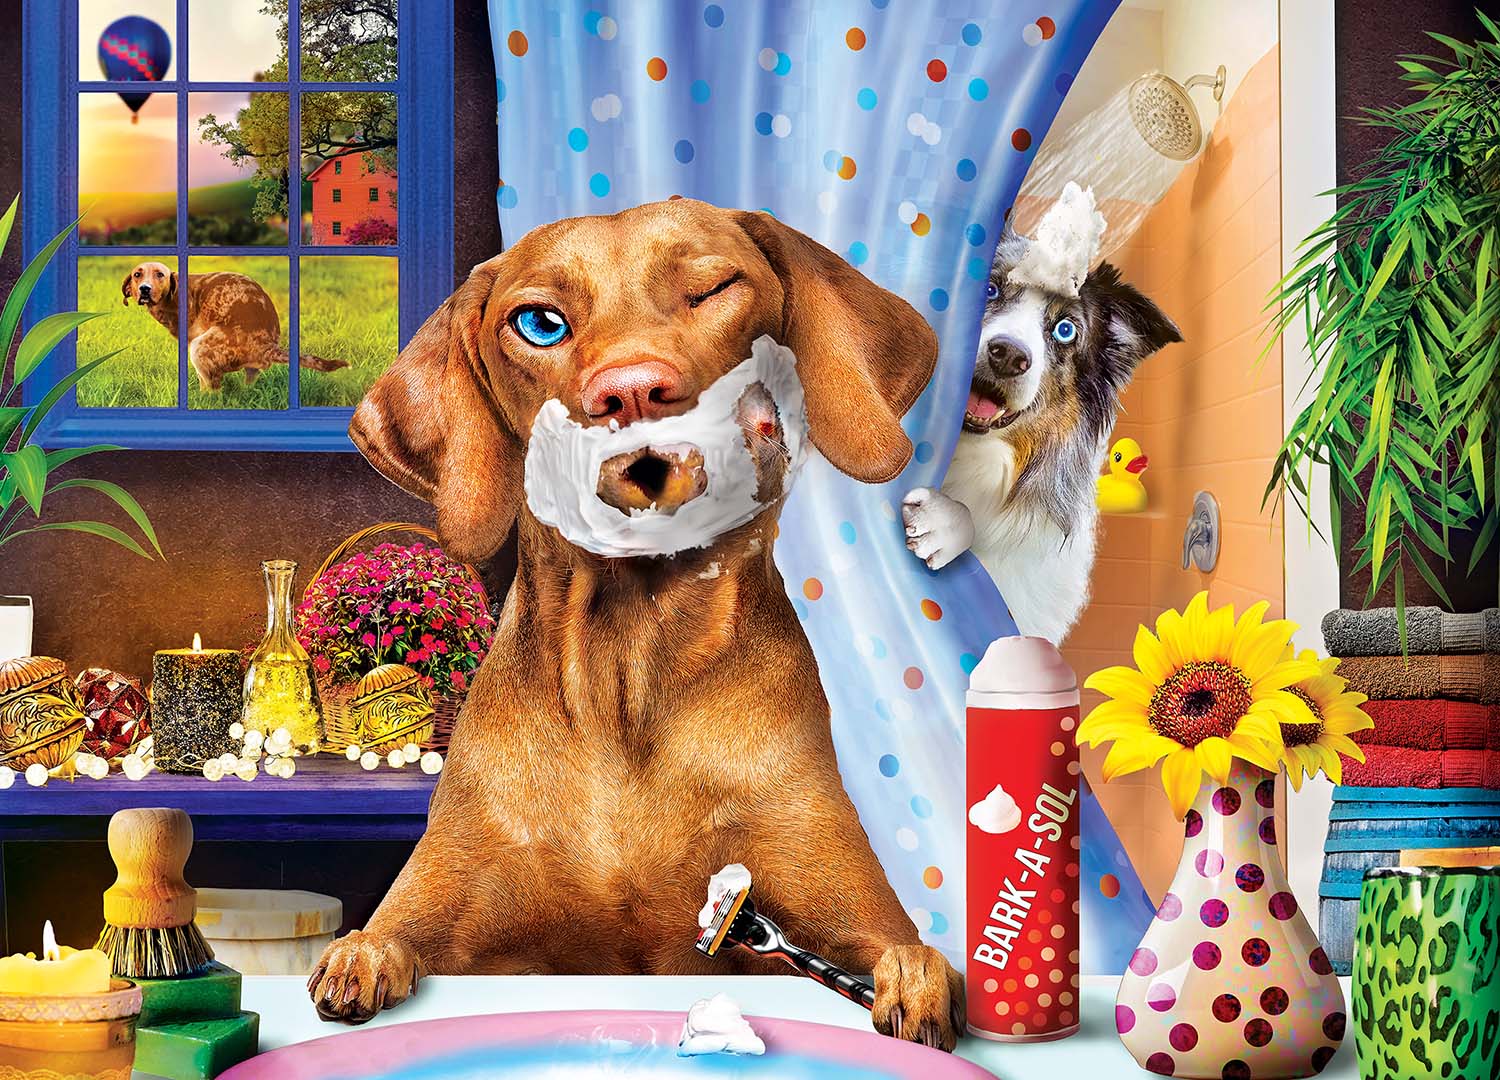 Wild & Whimsical - The Three S's Dogs Jigsaw Puzzle